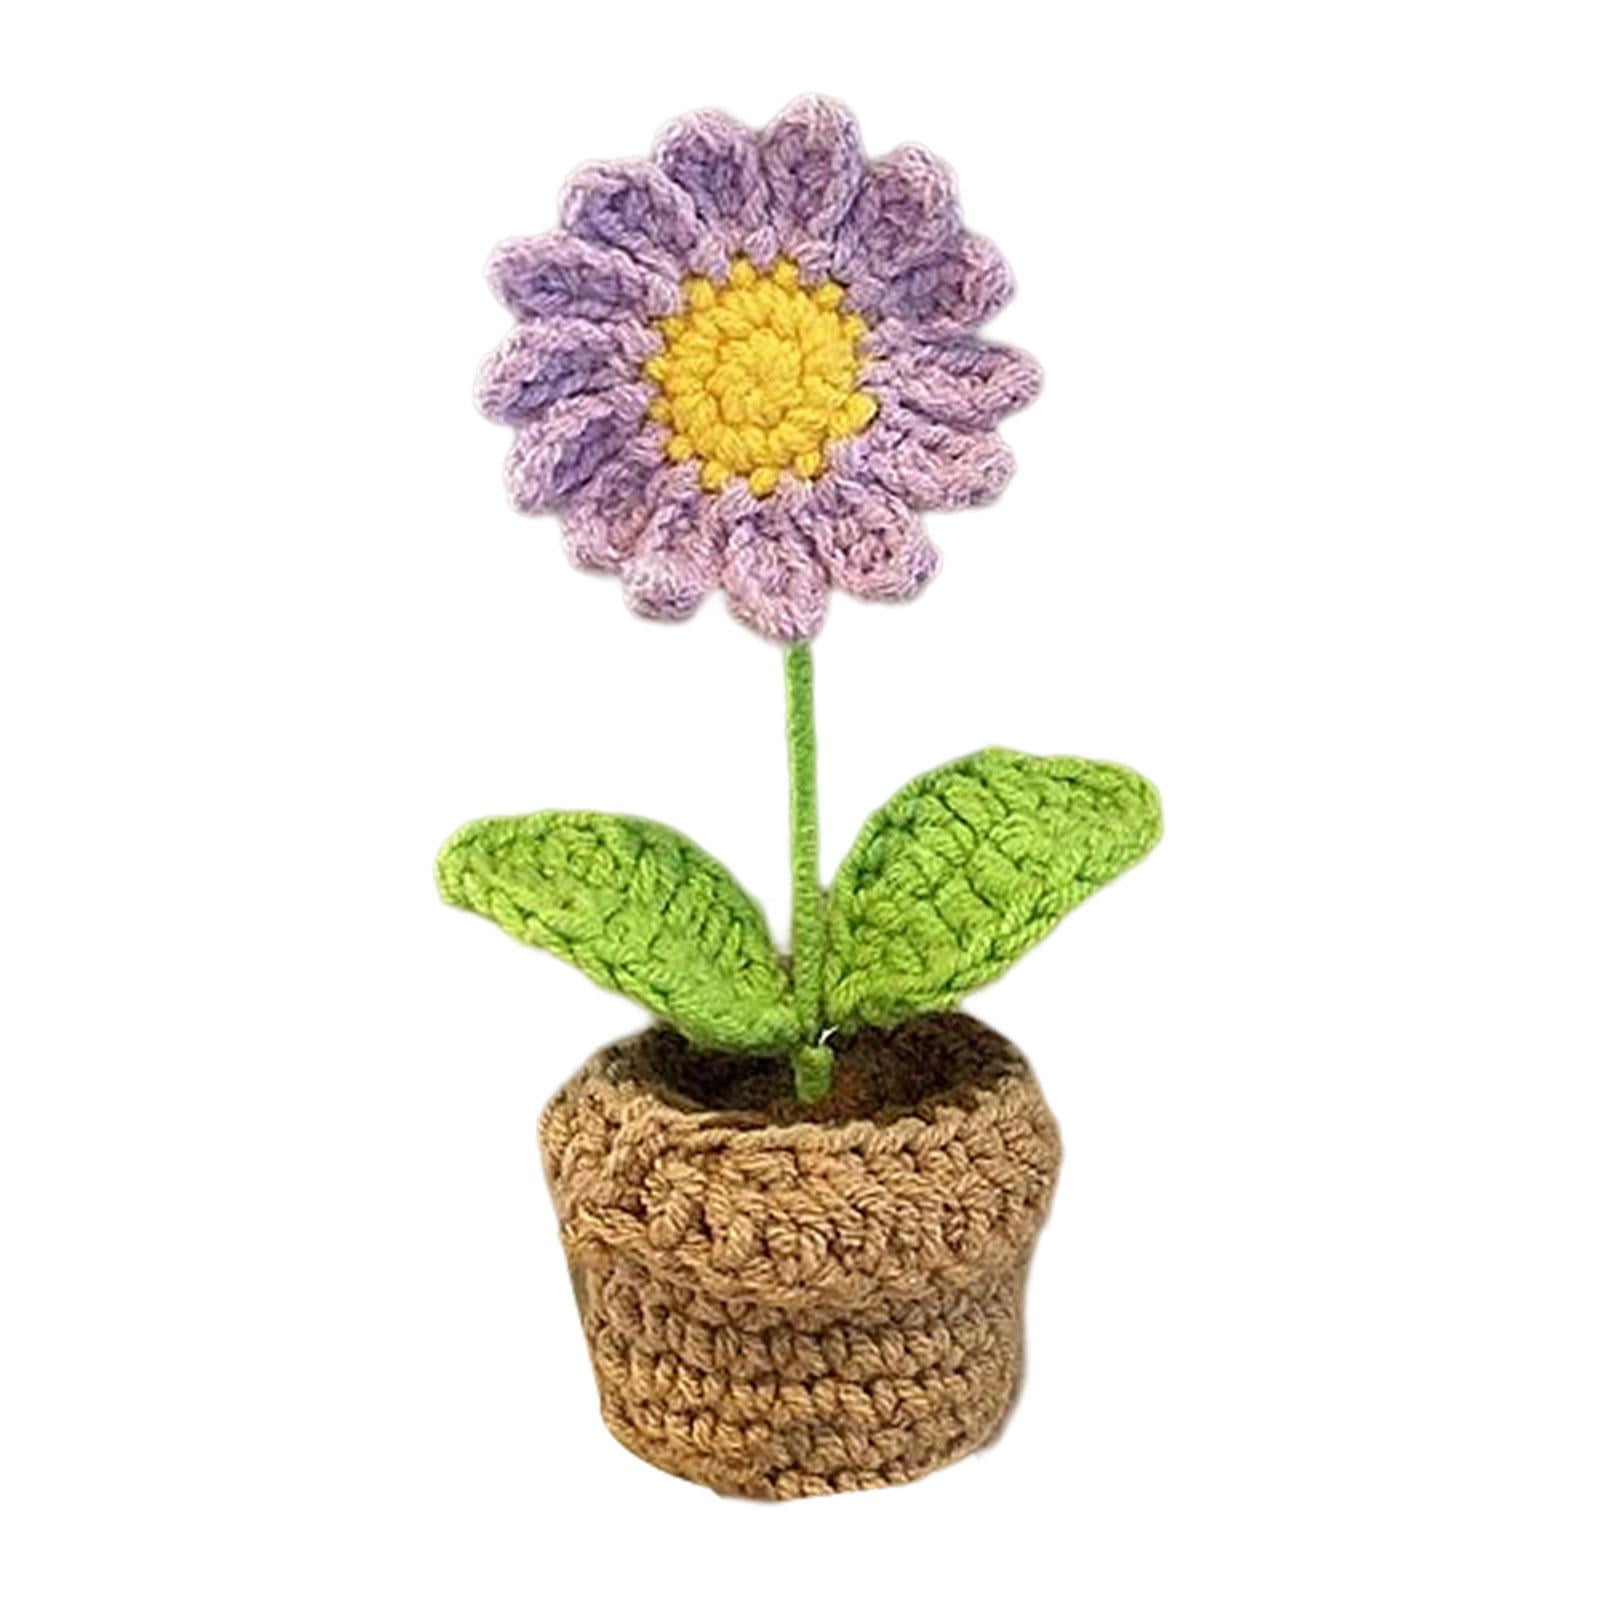  Emivery Crochet Flowers, 2pcs Handmade Knitted Daisy Sunflower  Pot Knitting Mini Artificial Flowers Bouquet with Flower Pot Set for Car  Dashboard Ornaments Indoor Outdoor Art Decor Gift : Home & Kitchen